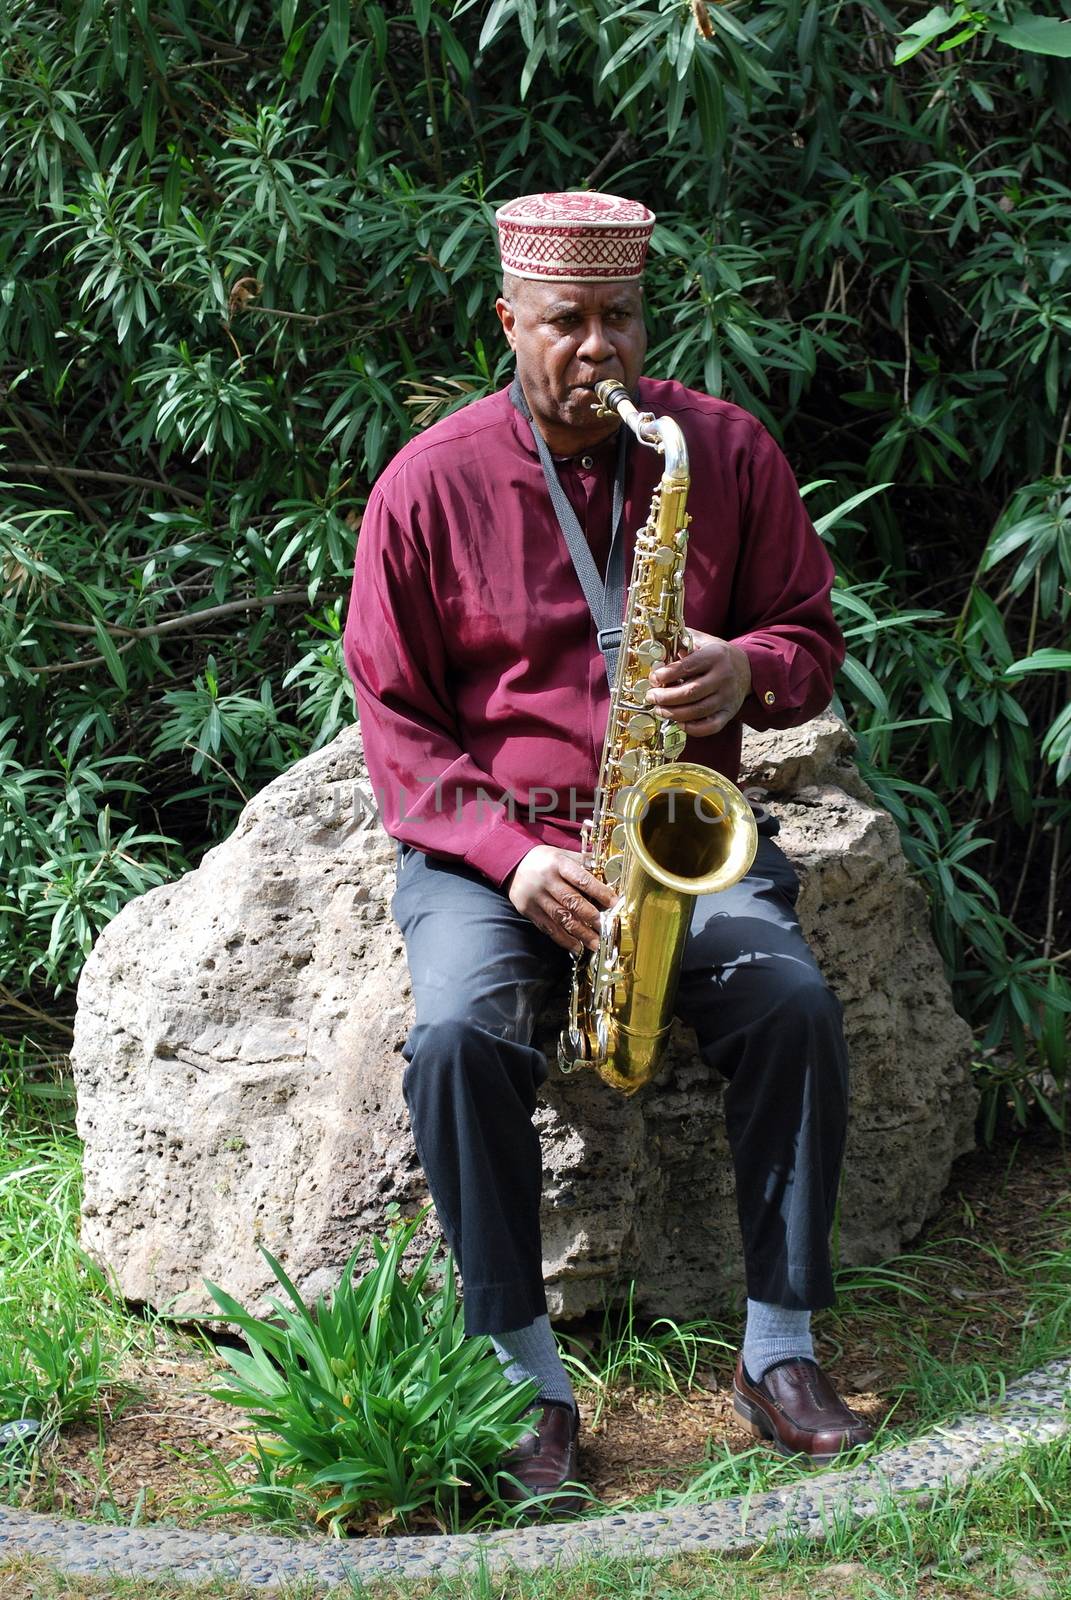 Muslim jazz musician with his saxophone outside.